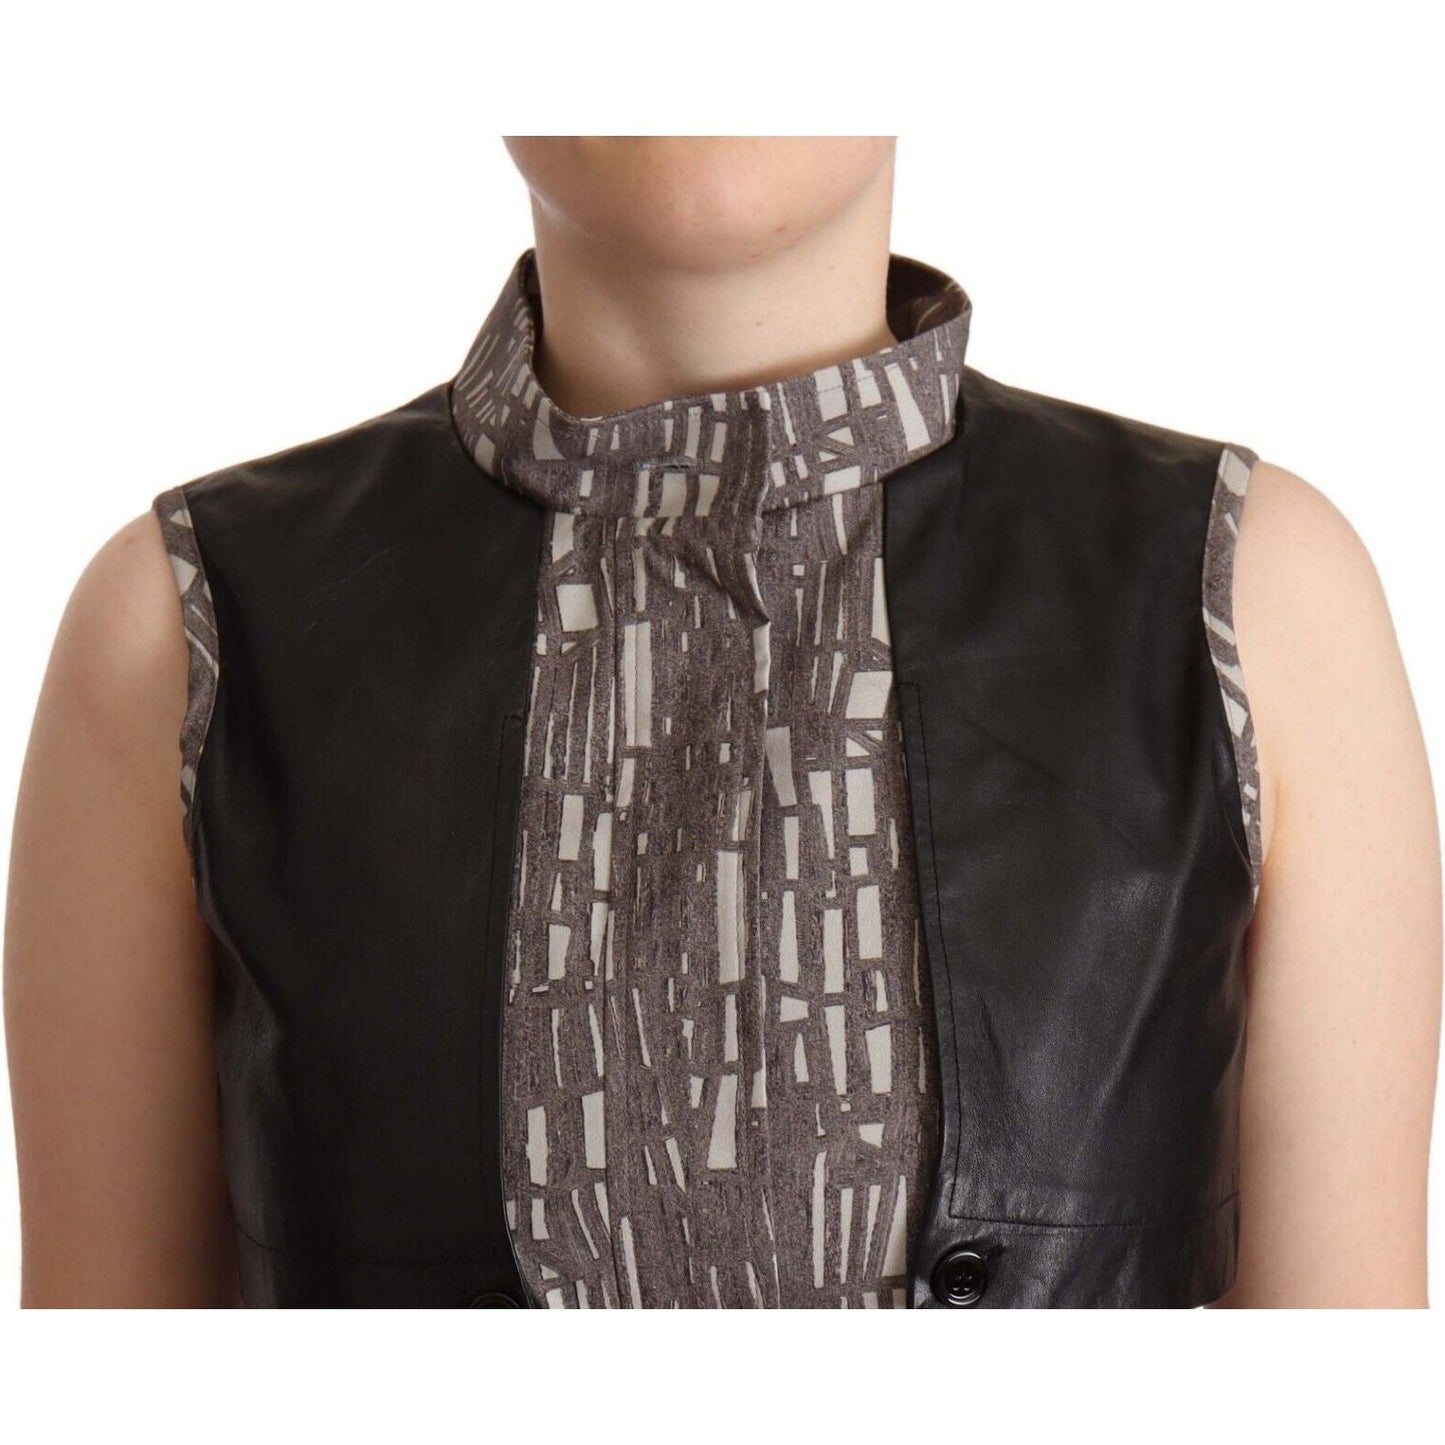 Comeforbreakfast Sleeveless Turtleneck Chic Top WOMAN TOPS AND SHIRTS brown-black-vest-leather-sleeveless-top-blouse s-l1600-3-33-3f7521c3-b49.jpg